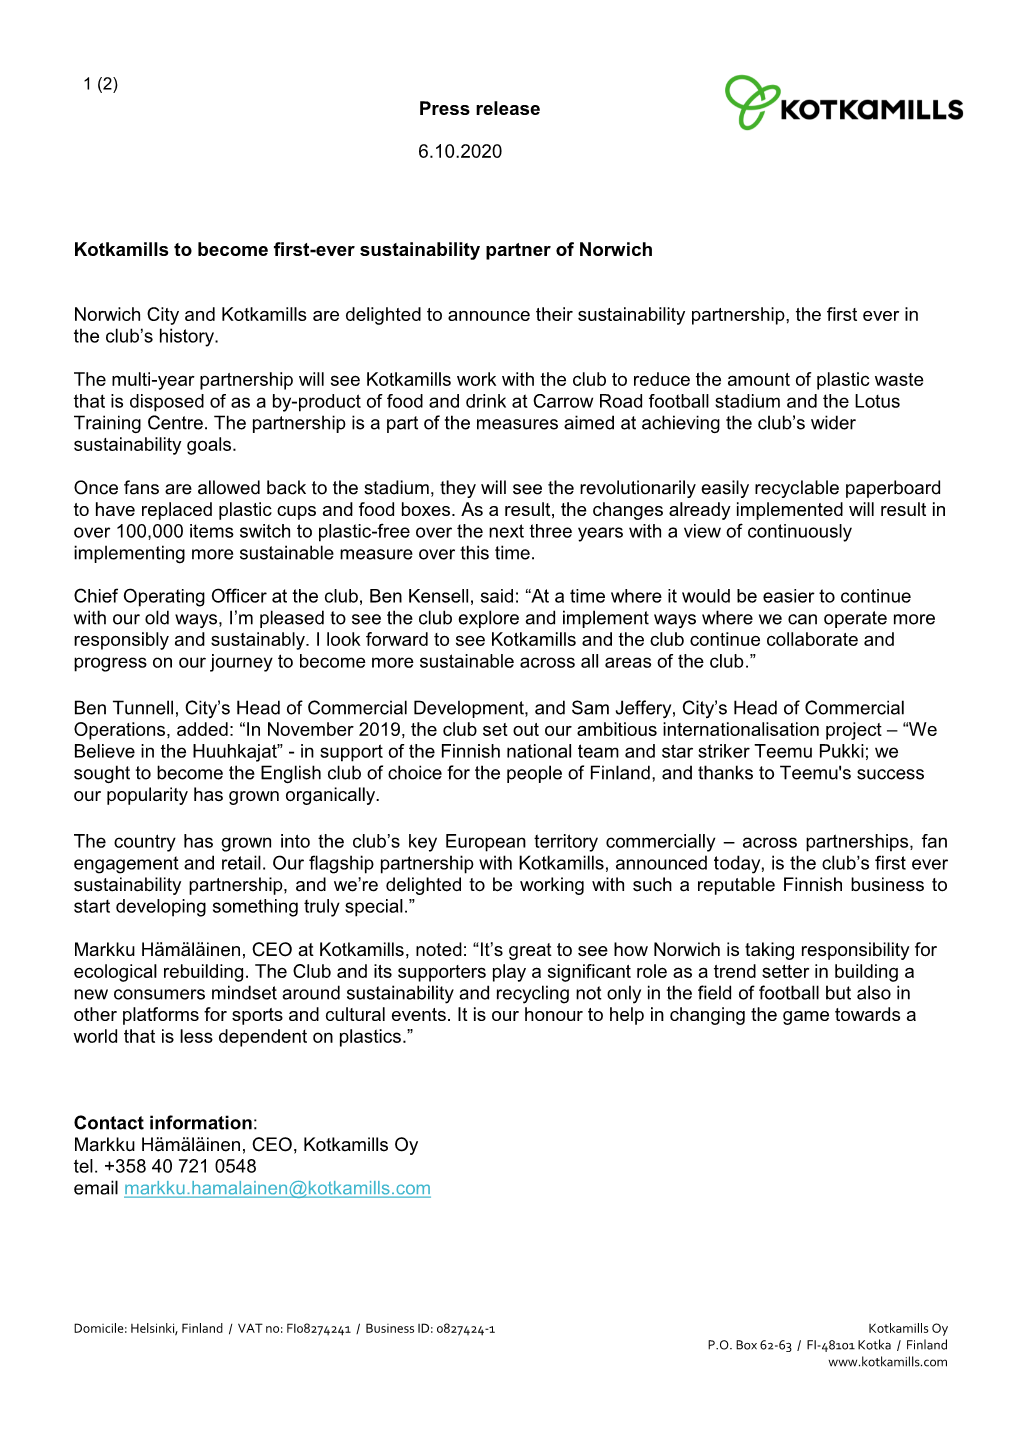 Press Release 6.10.2020 Kotkamills to Become First-Ever Sustainability Partner of Norwich Norwich City and Kotkamills Are Deligh